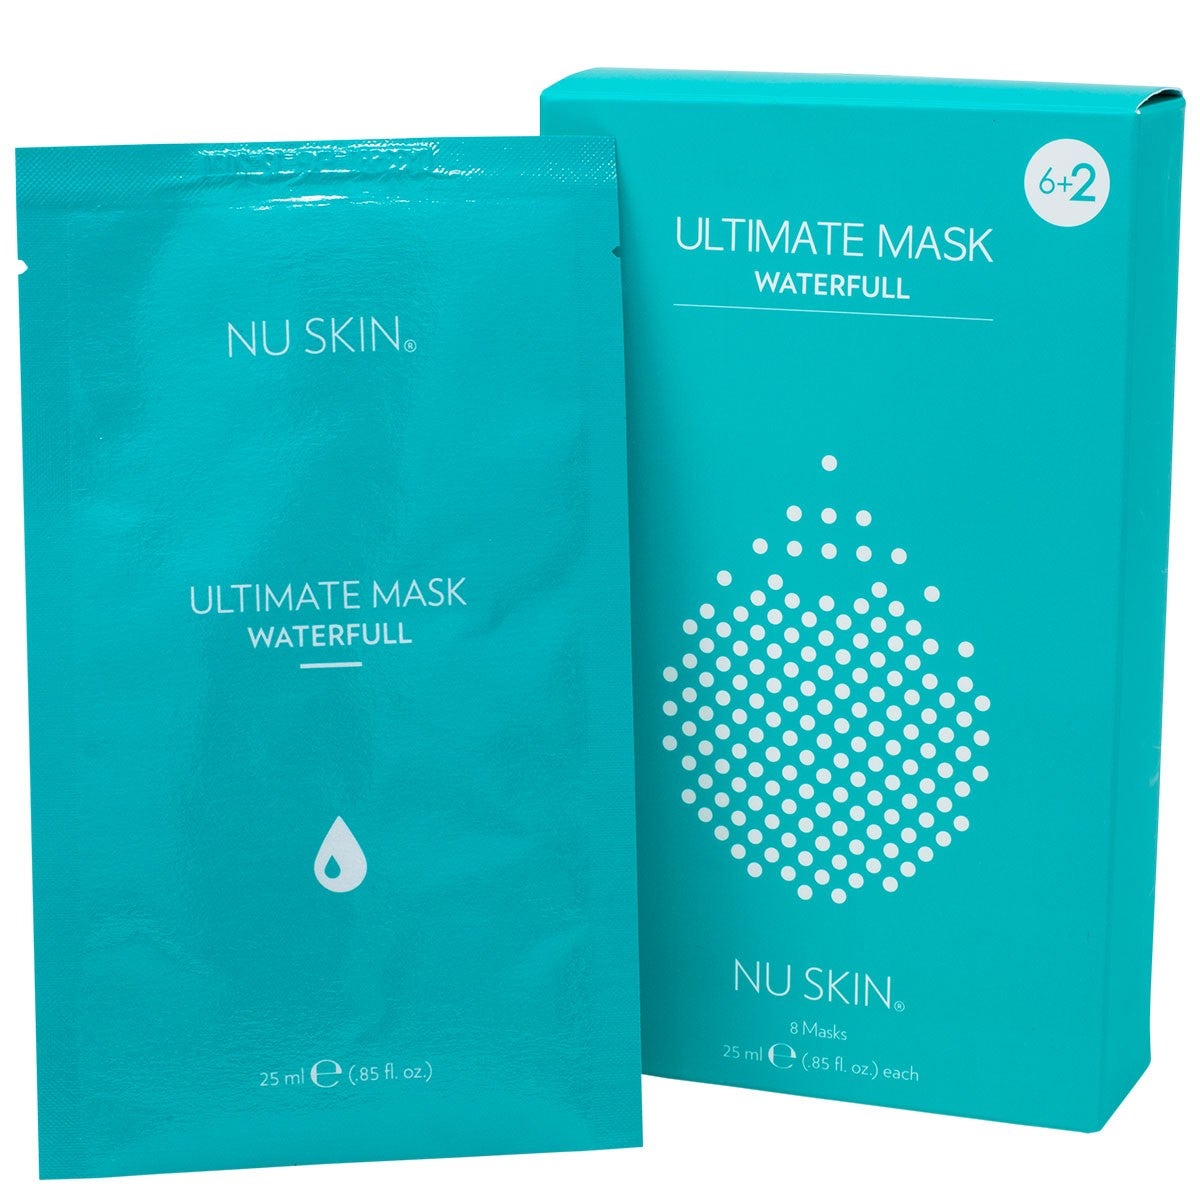 Ultimate Waterfull MaskBuy Ultimate Waterfull Mask
* Discount will apply at checkout. 




Nu Skin Ultimate Waterfull Mask combines the power of rich humectants with water binding moistureUltimate Waterfull Mask